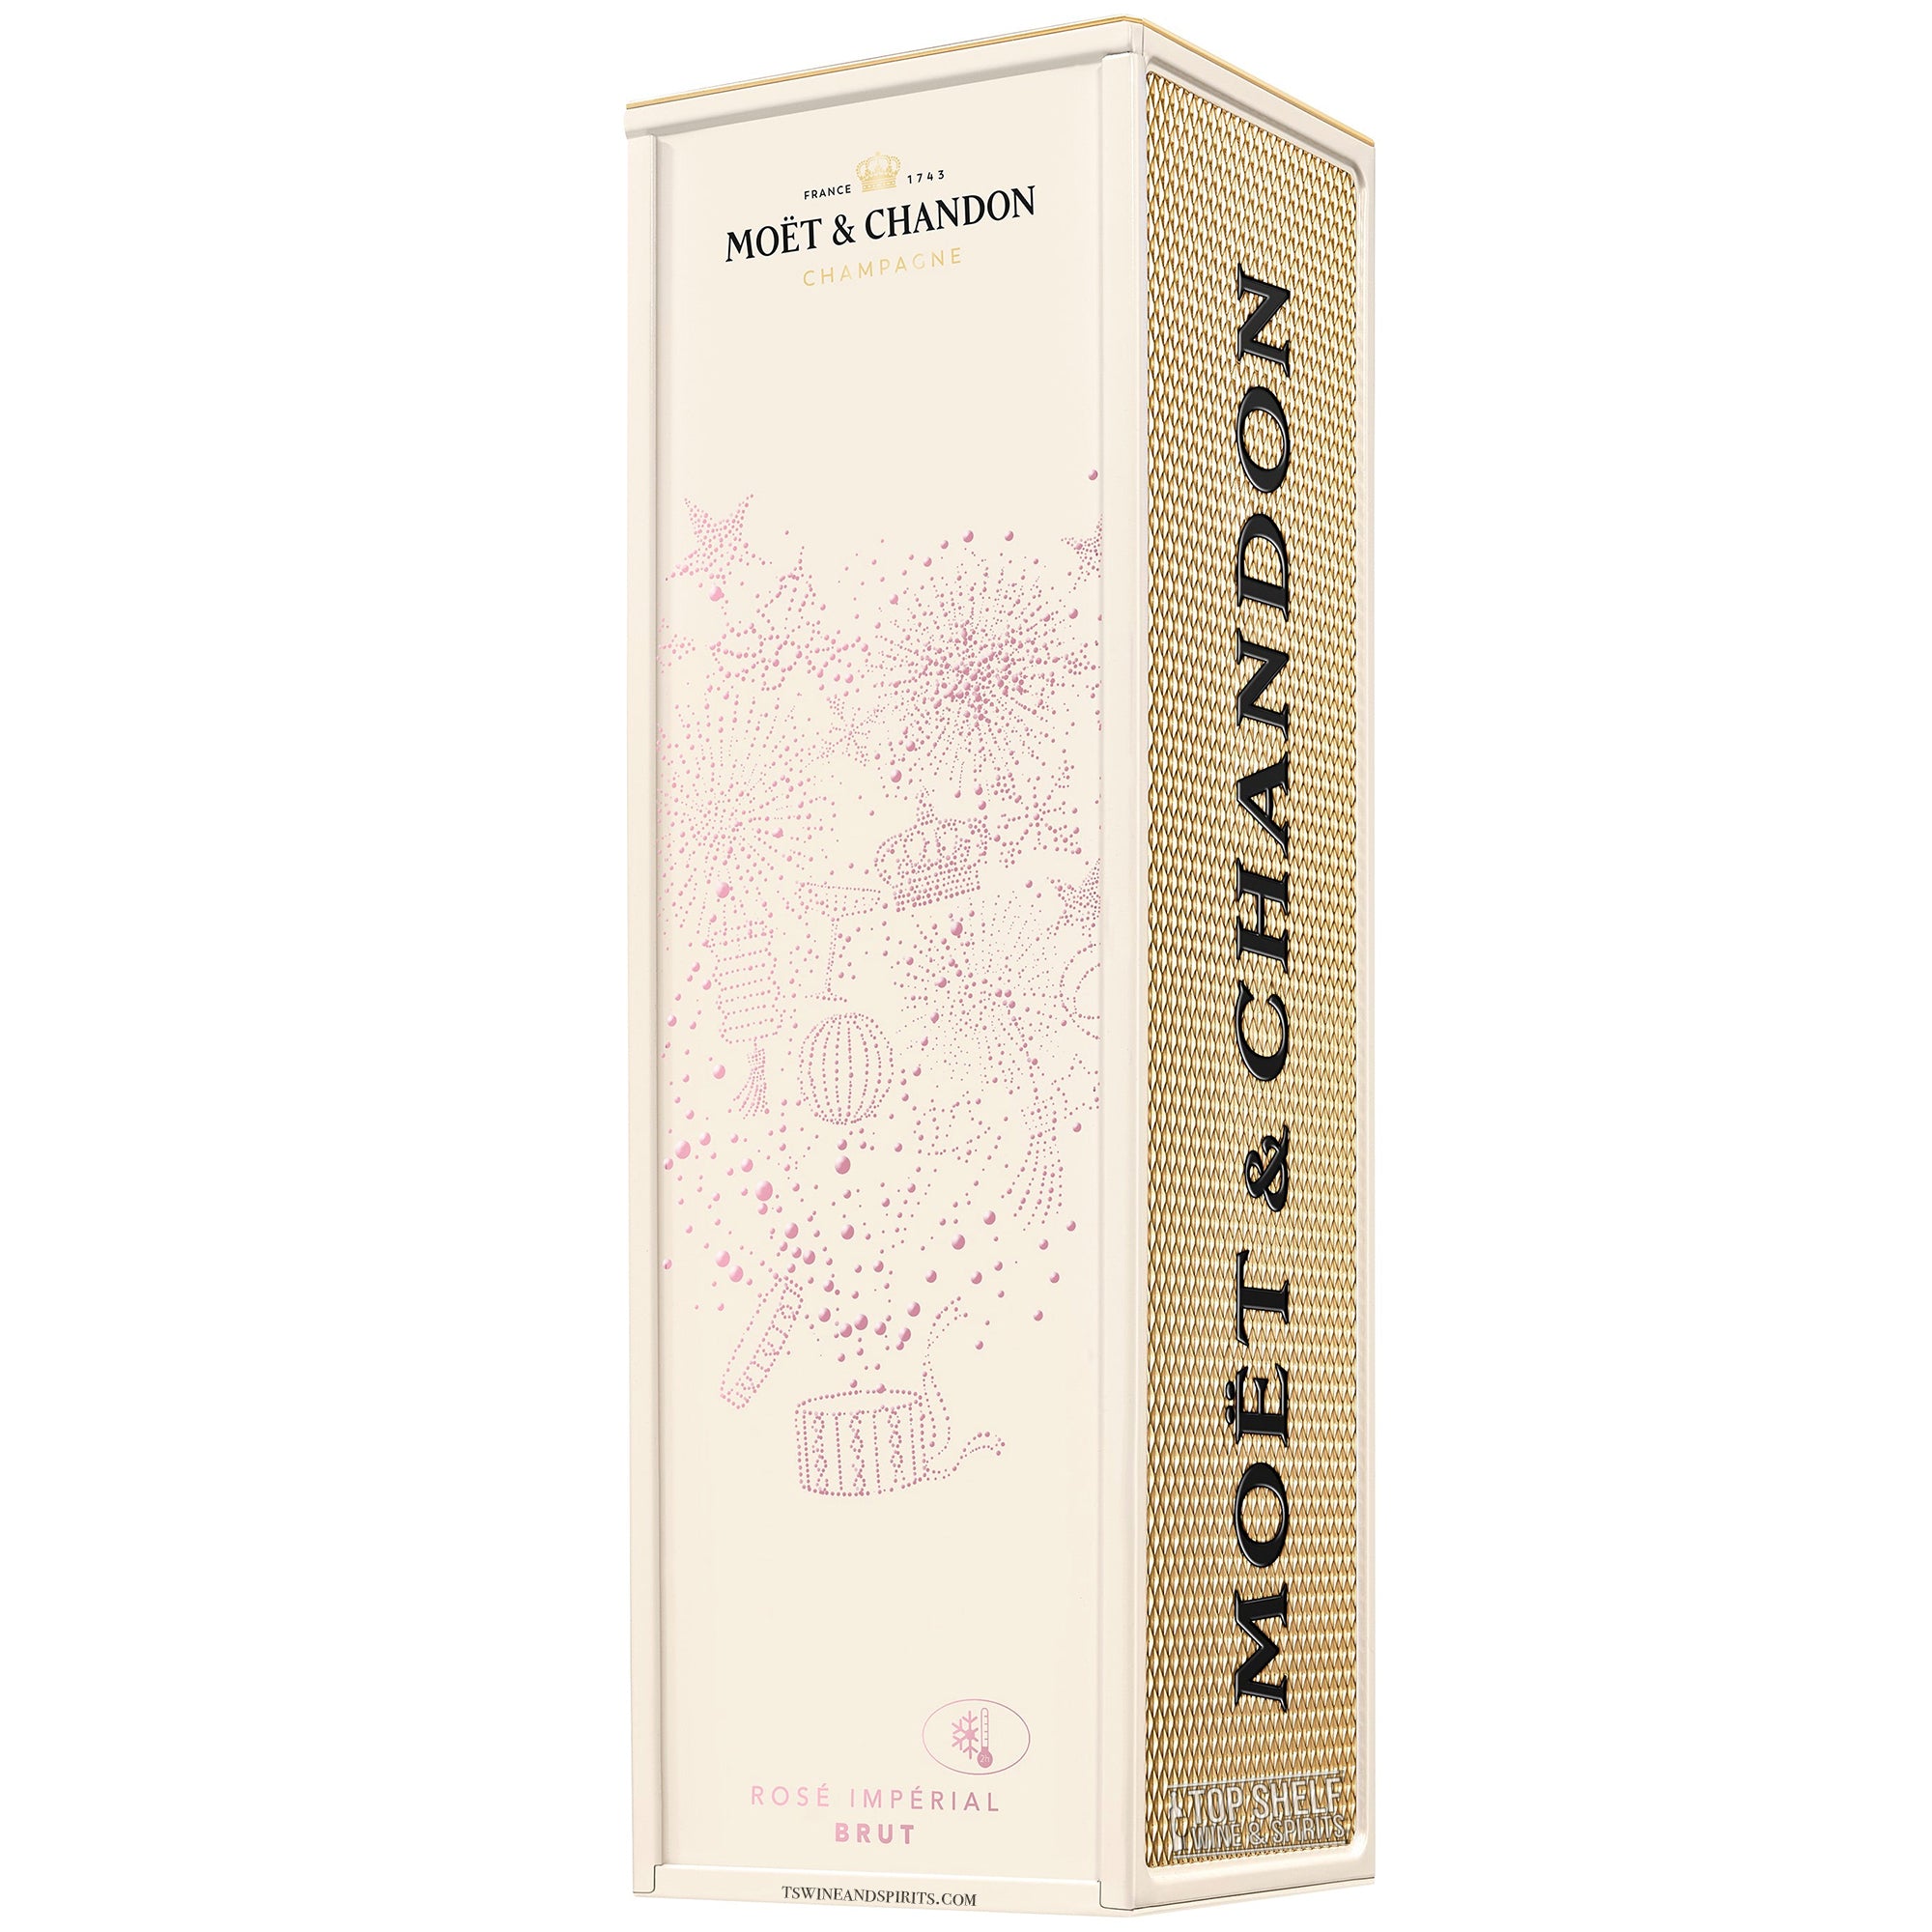 NV Moet & Chandon NBA Box Edition Nectar Imperial Rose, Champagne, Fra –  Woods Wholesale Wine